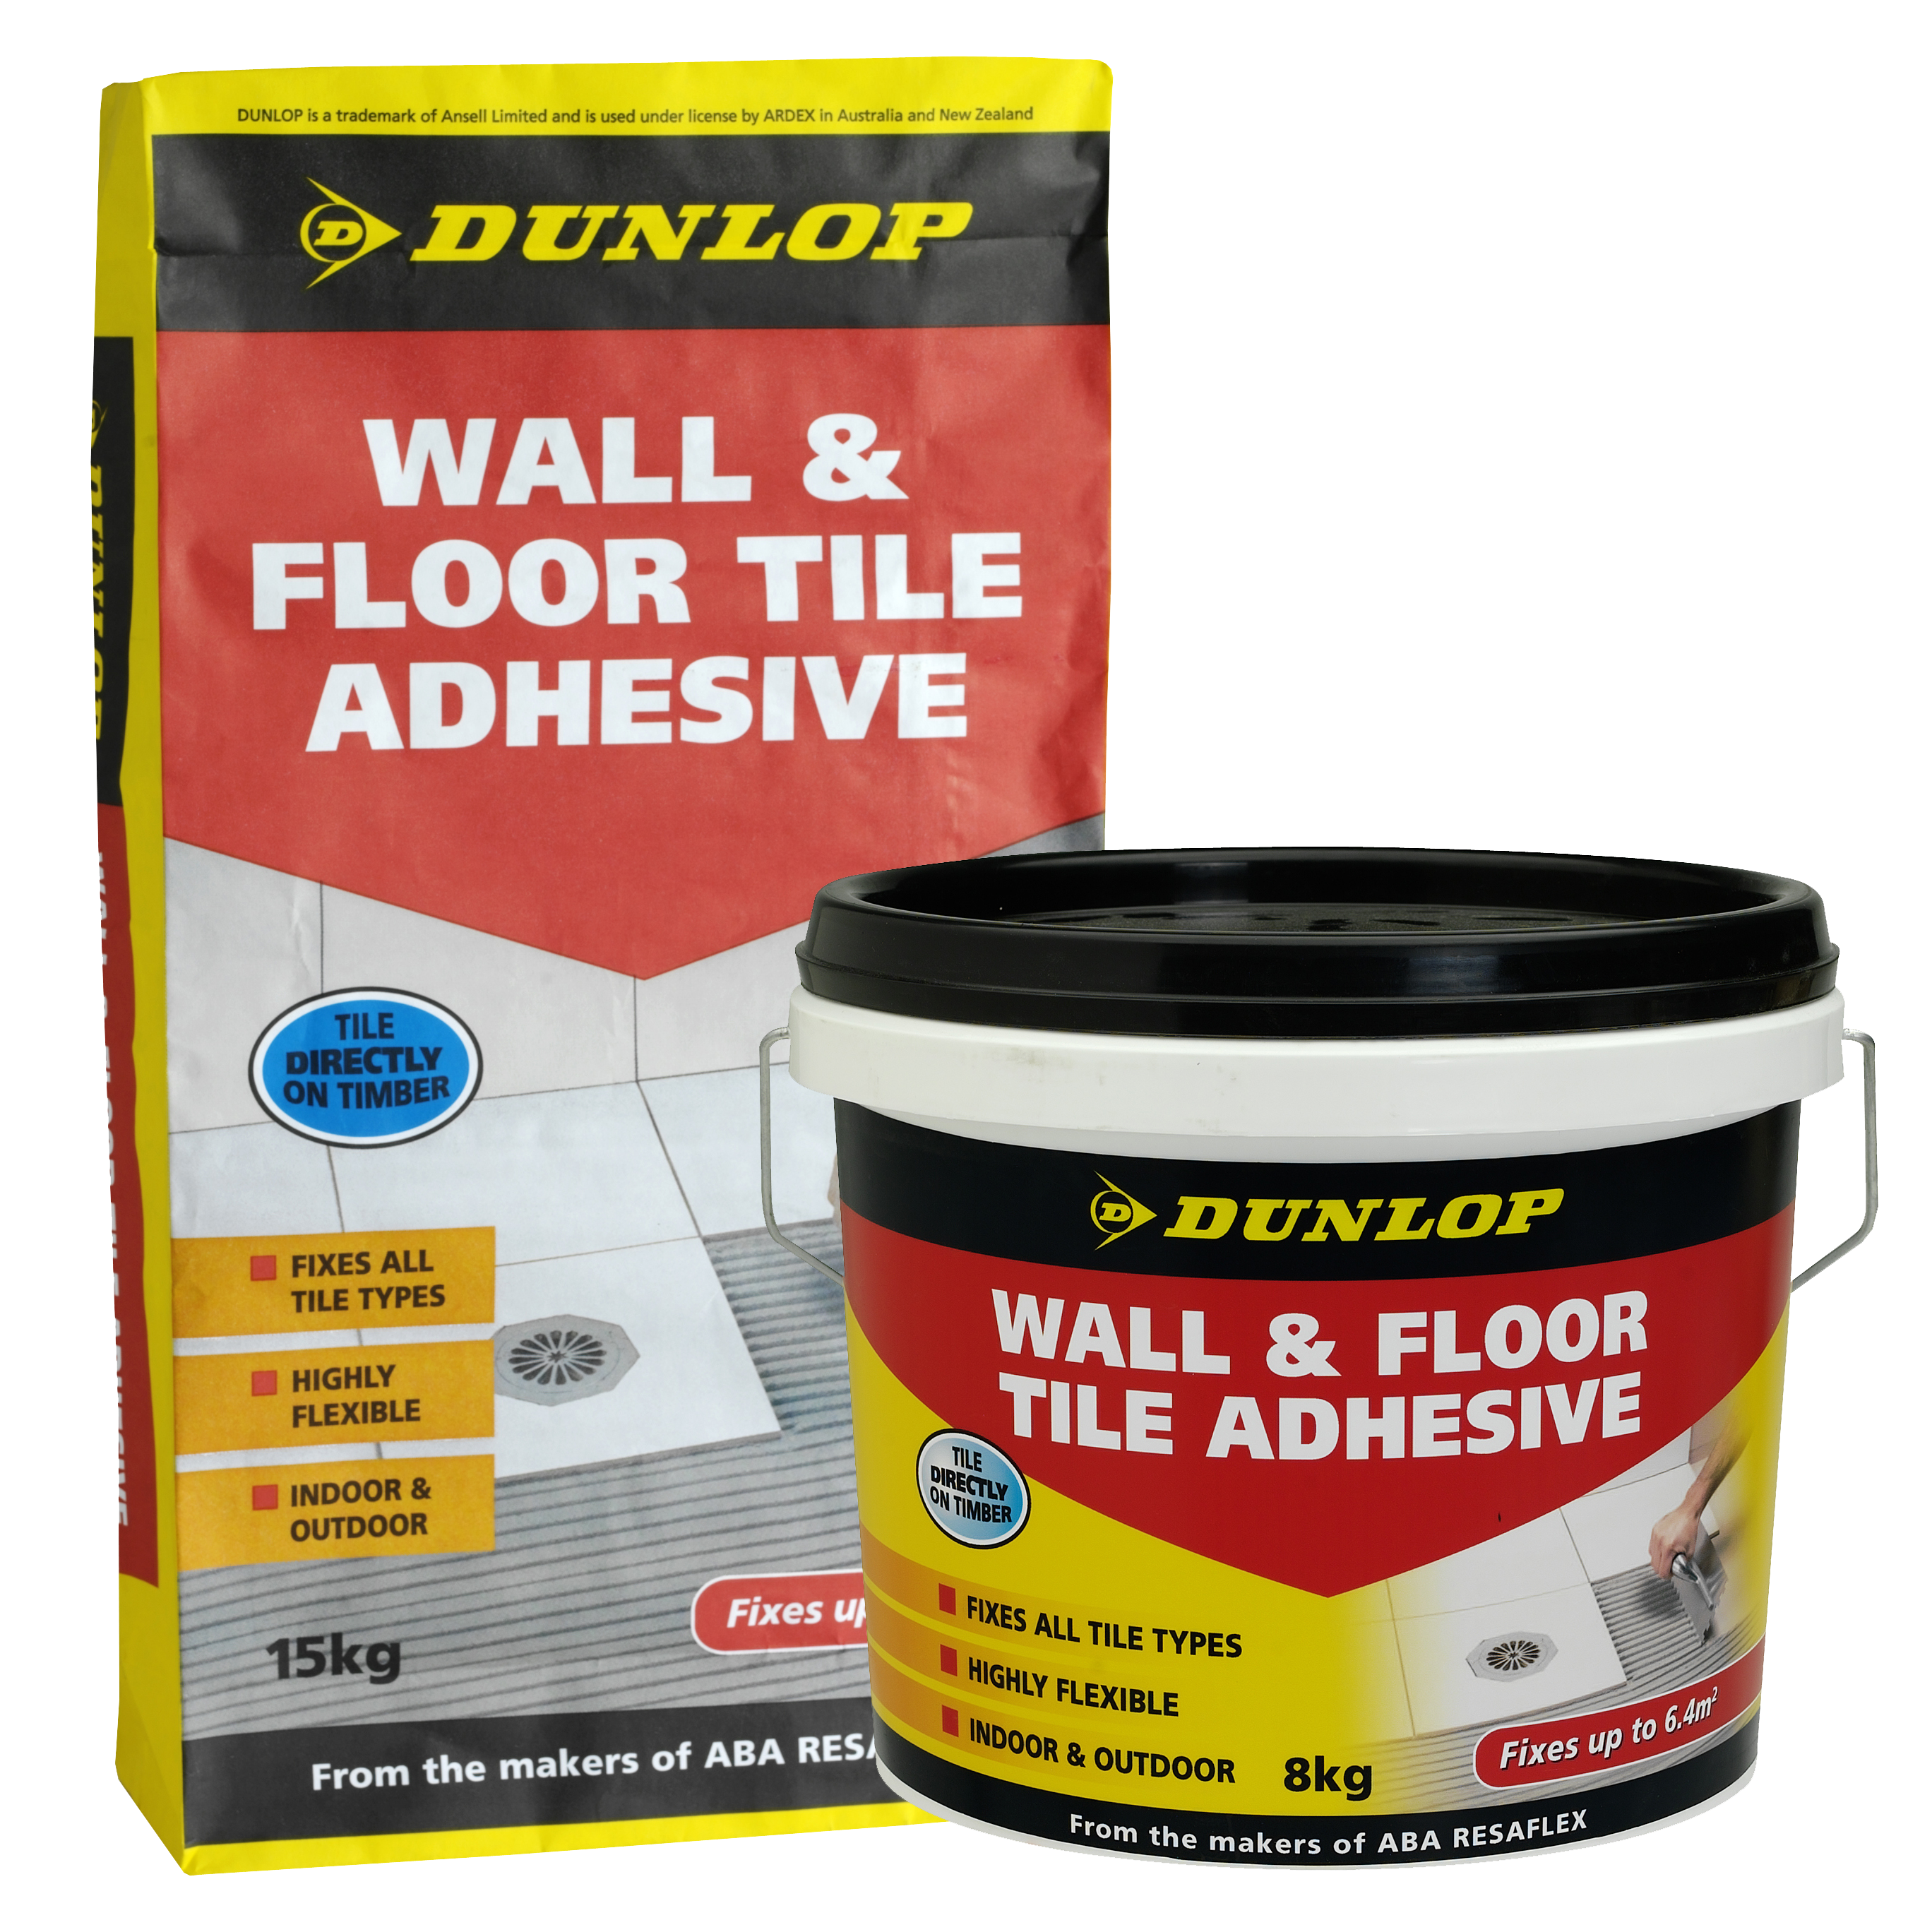 Dunlop Building Products - Dunlop SUPER Lite Tile Adhesive is our premier,  silica free adhesive offering users a high bond light weight mastic adhesive.  Suitable for most tiling applications, our revised silica